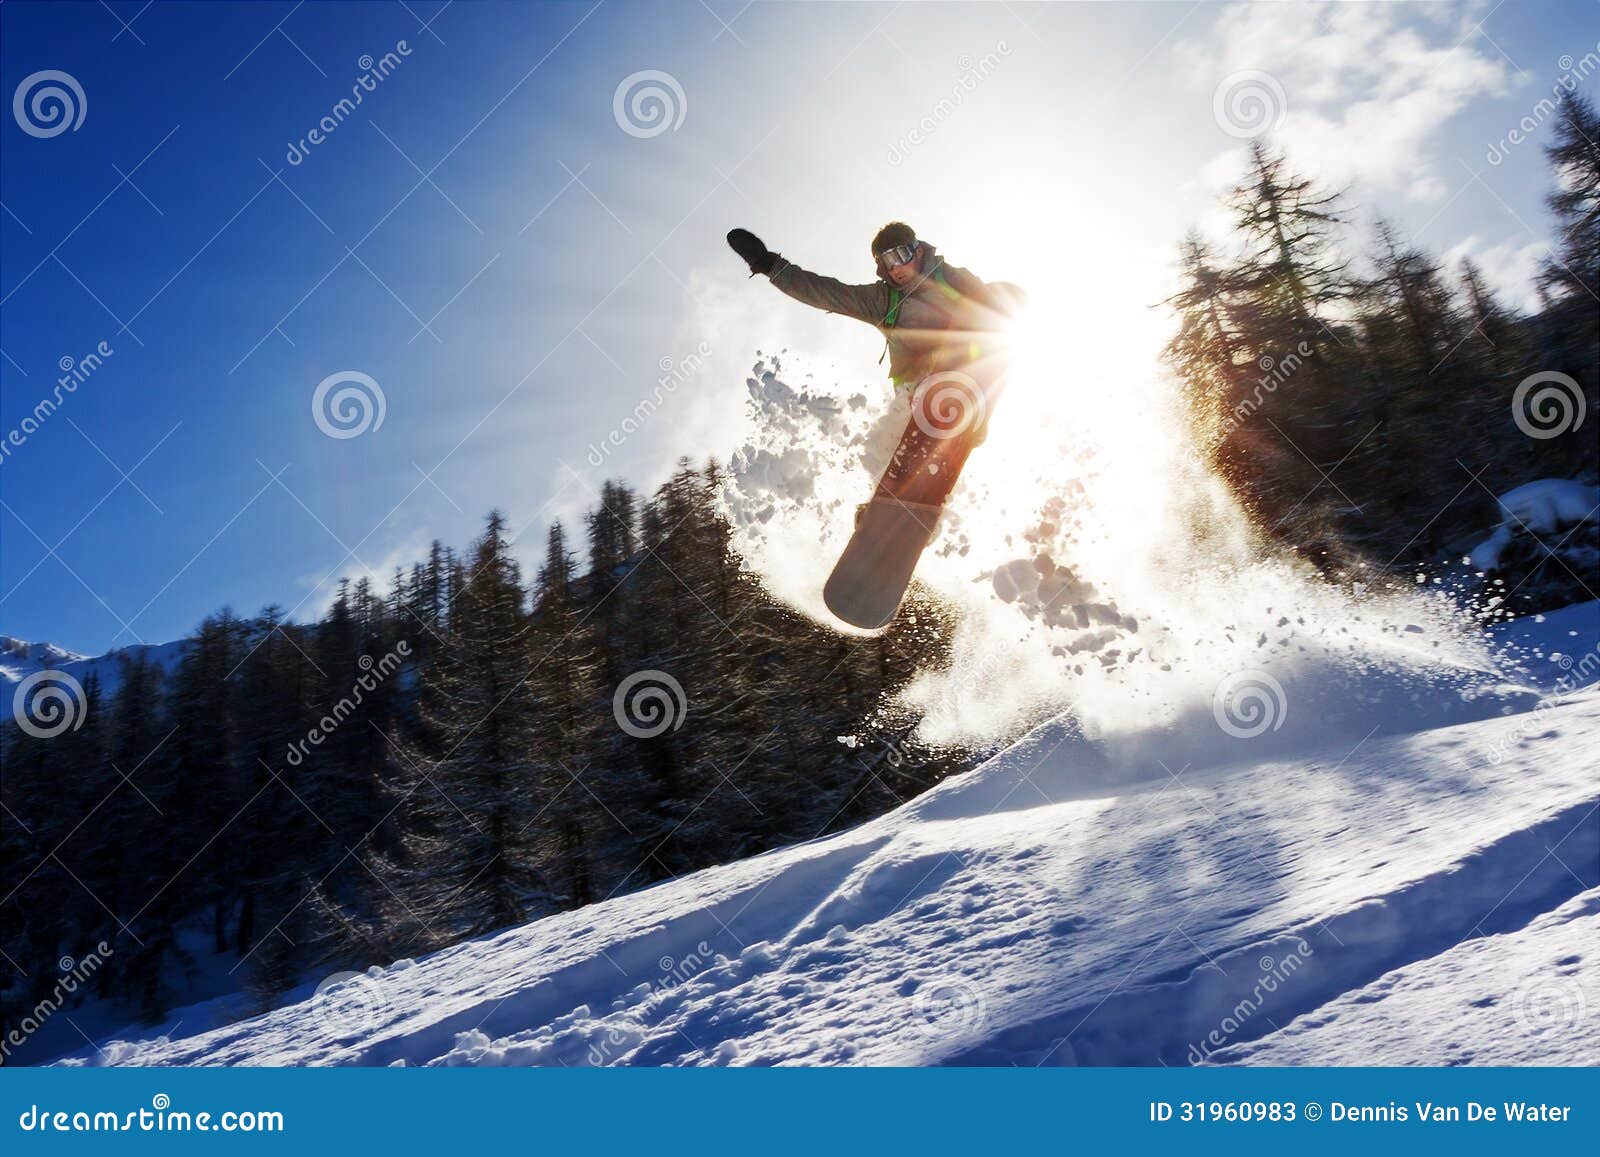 Snowboard sun power stock image. Image of action, leisure - 31960983